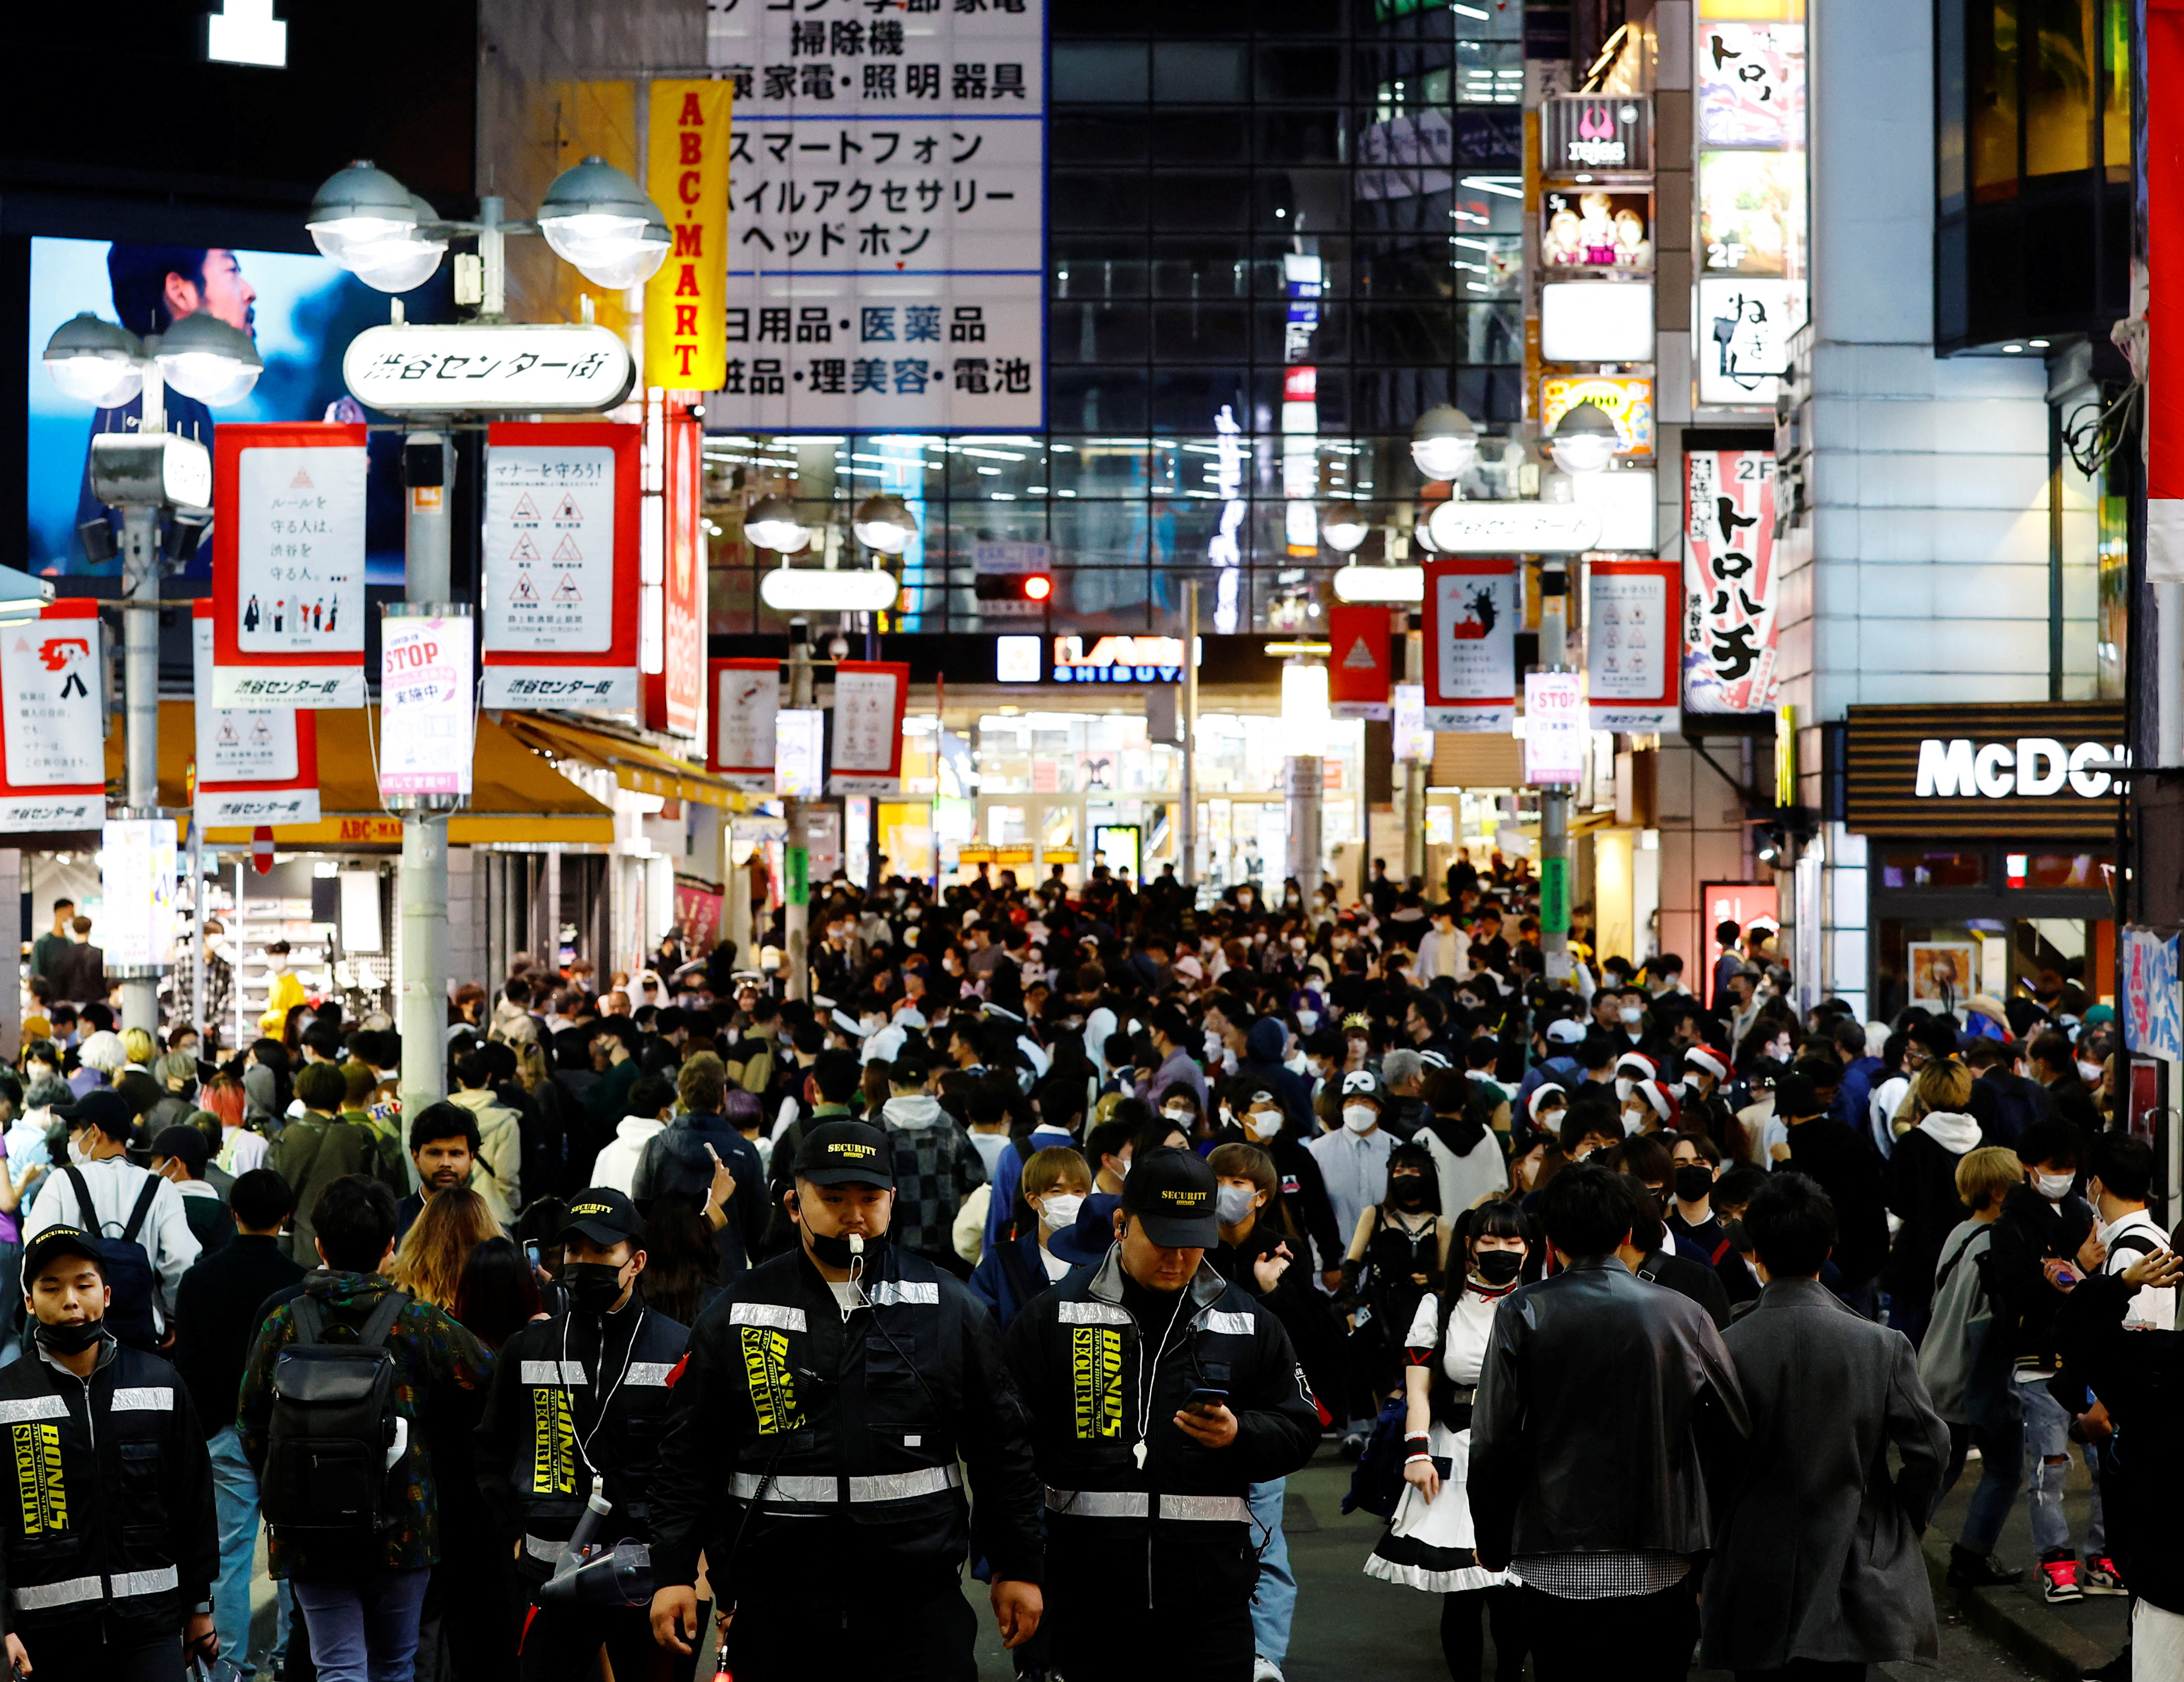 Security guards patrol to control crowds gathering to celebrate Halloween on the street at Tokyo's Shibuya entertainment and shopping district in Tokyo, Japan October 31, 2022. REUTERS/Kim Kyung-Hoon